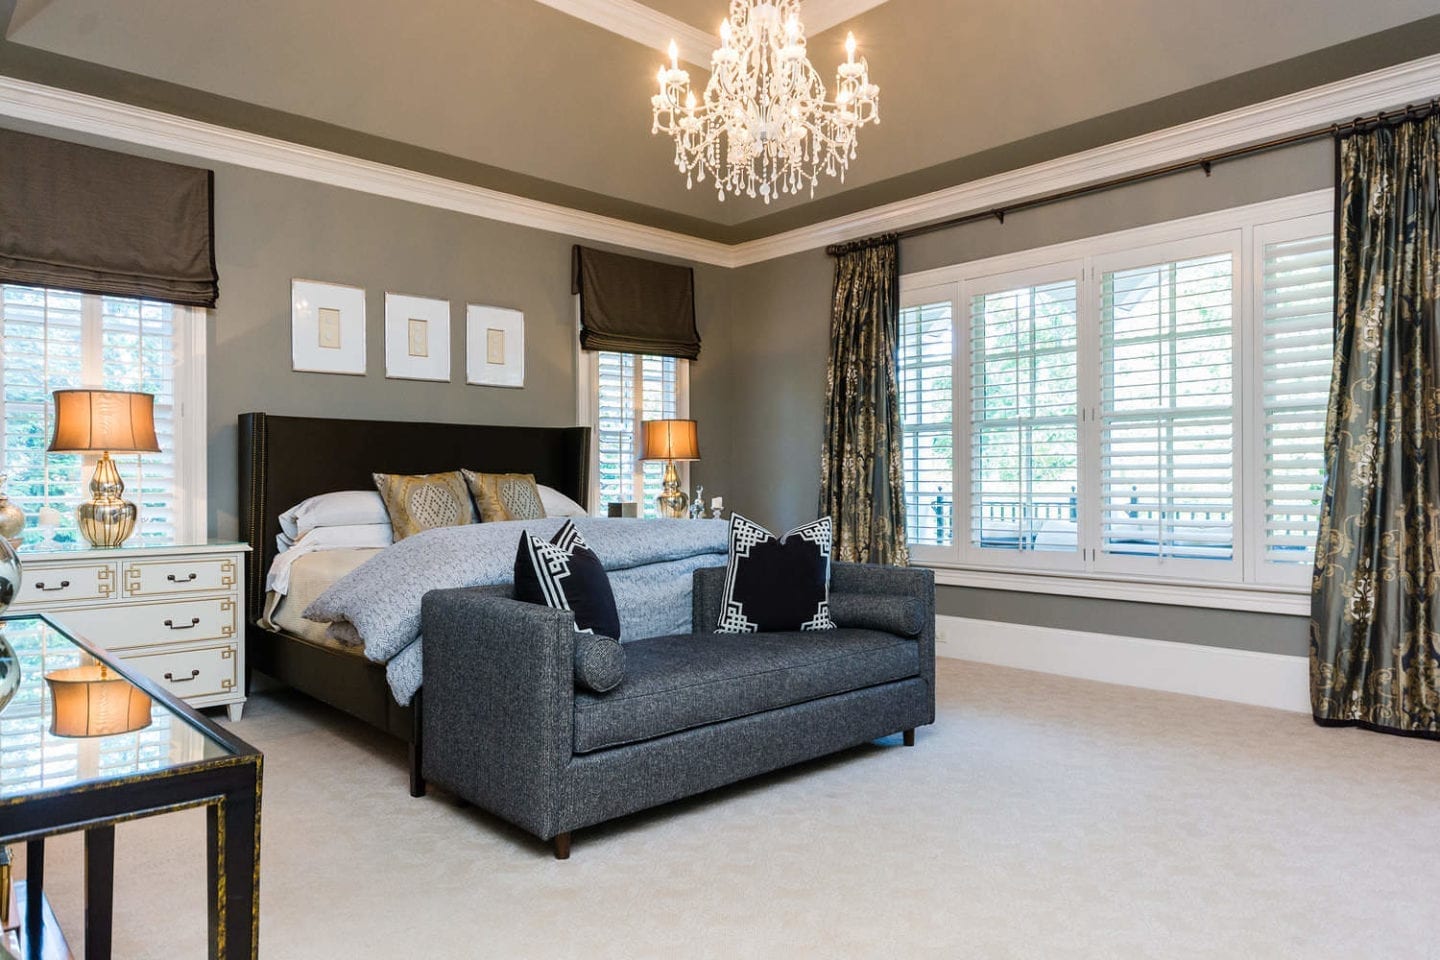 Gray Master Bedroom. How to decorate your house in gray. White chandelier and gray bench in front of Brown Silk bed.